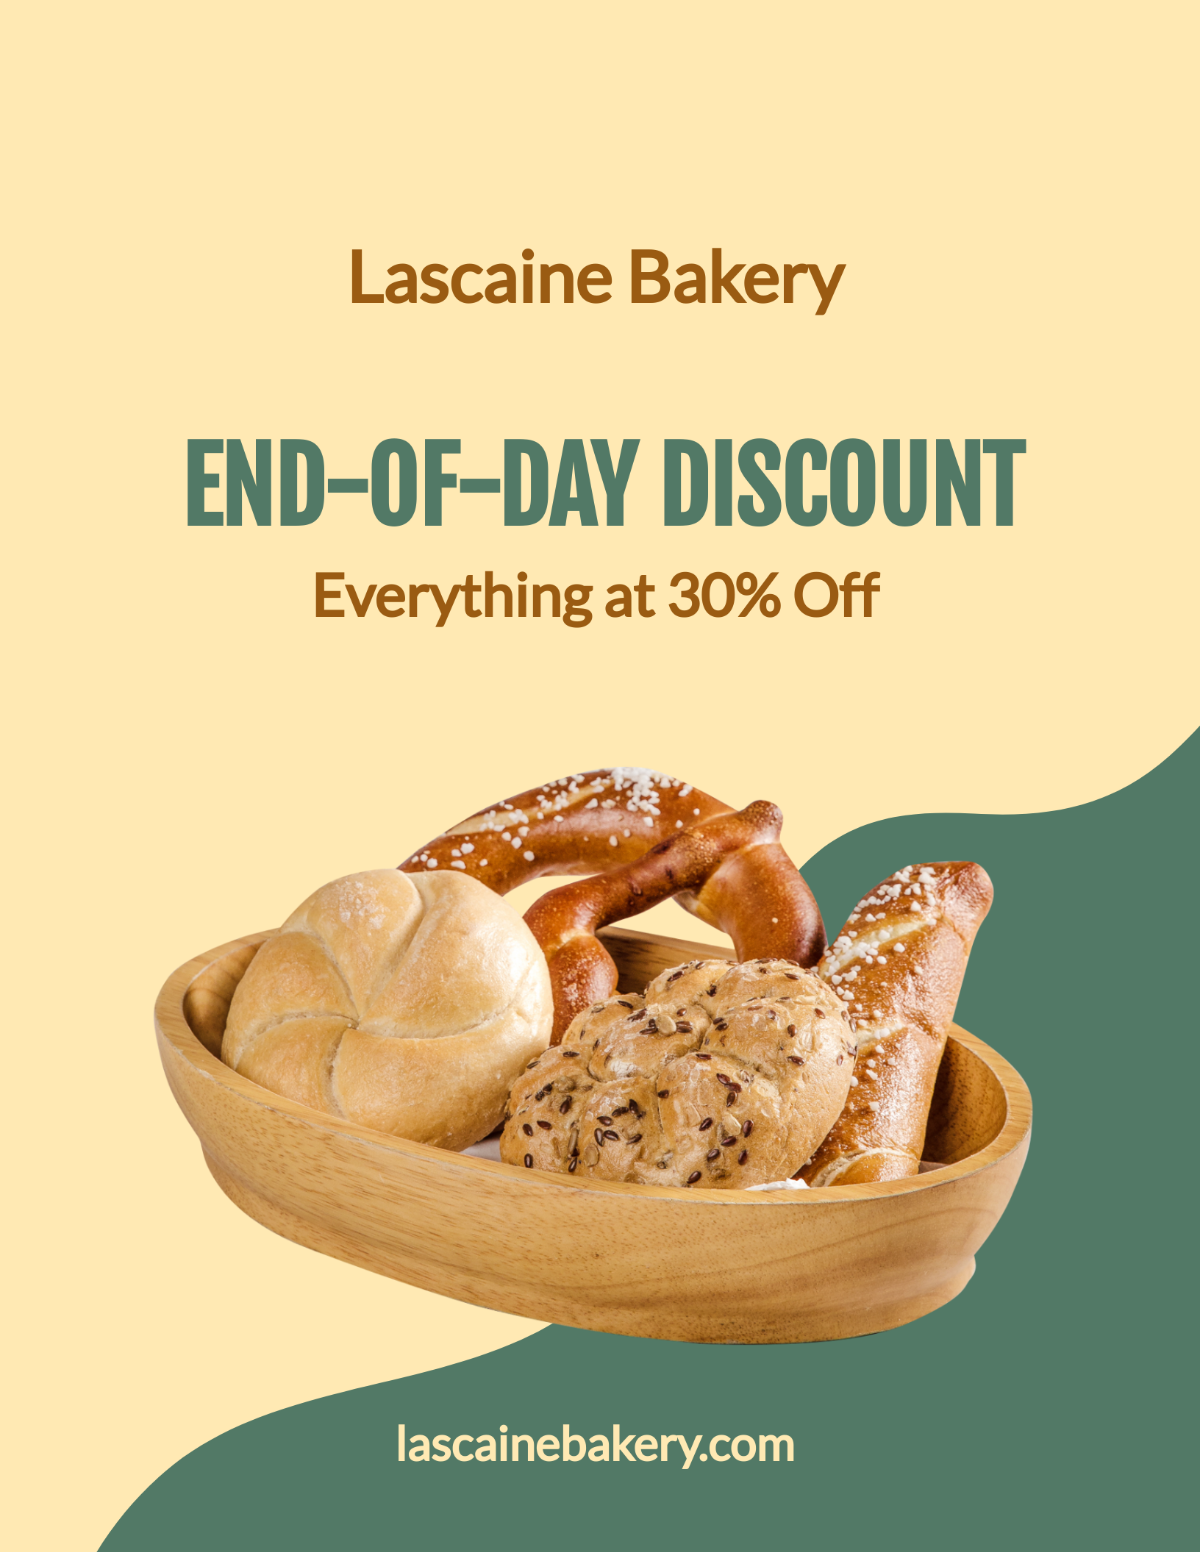 Bakery Discount Promotion Flyer Template